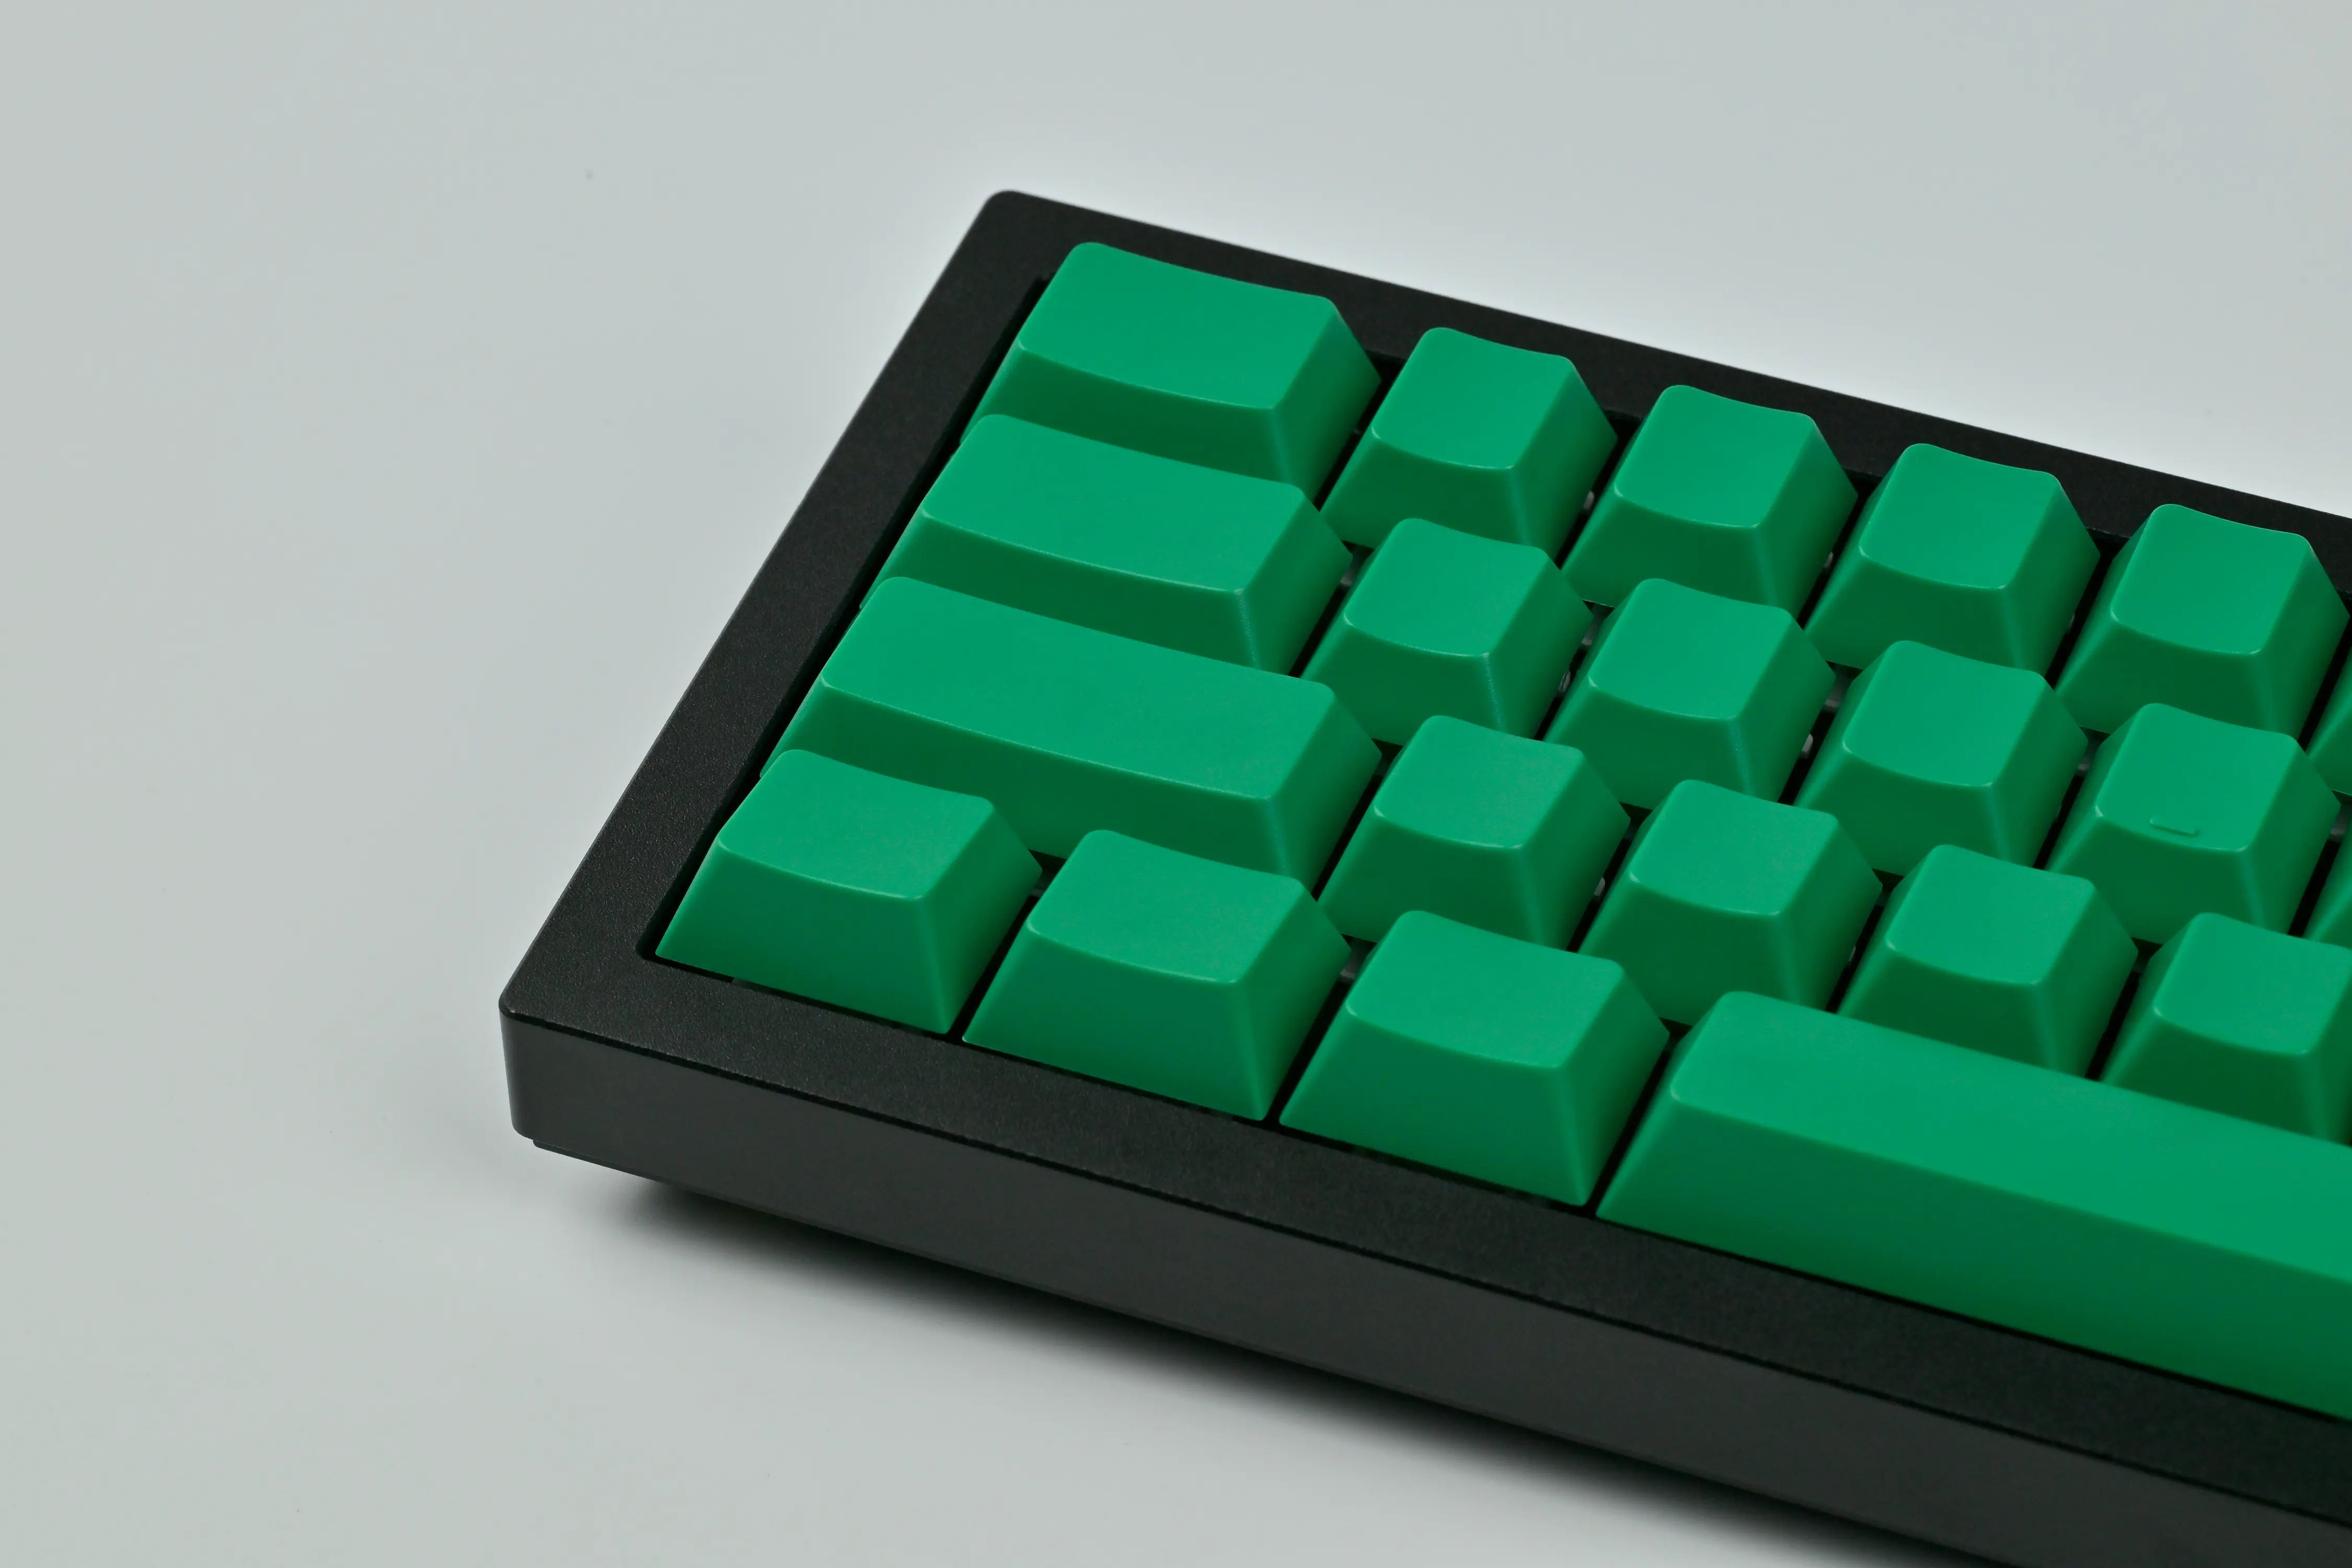 Keyreative ABS Cherry Profile Green Blank Keycaps